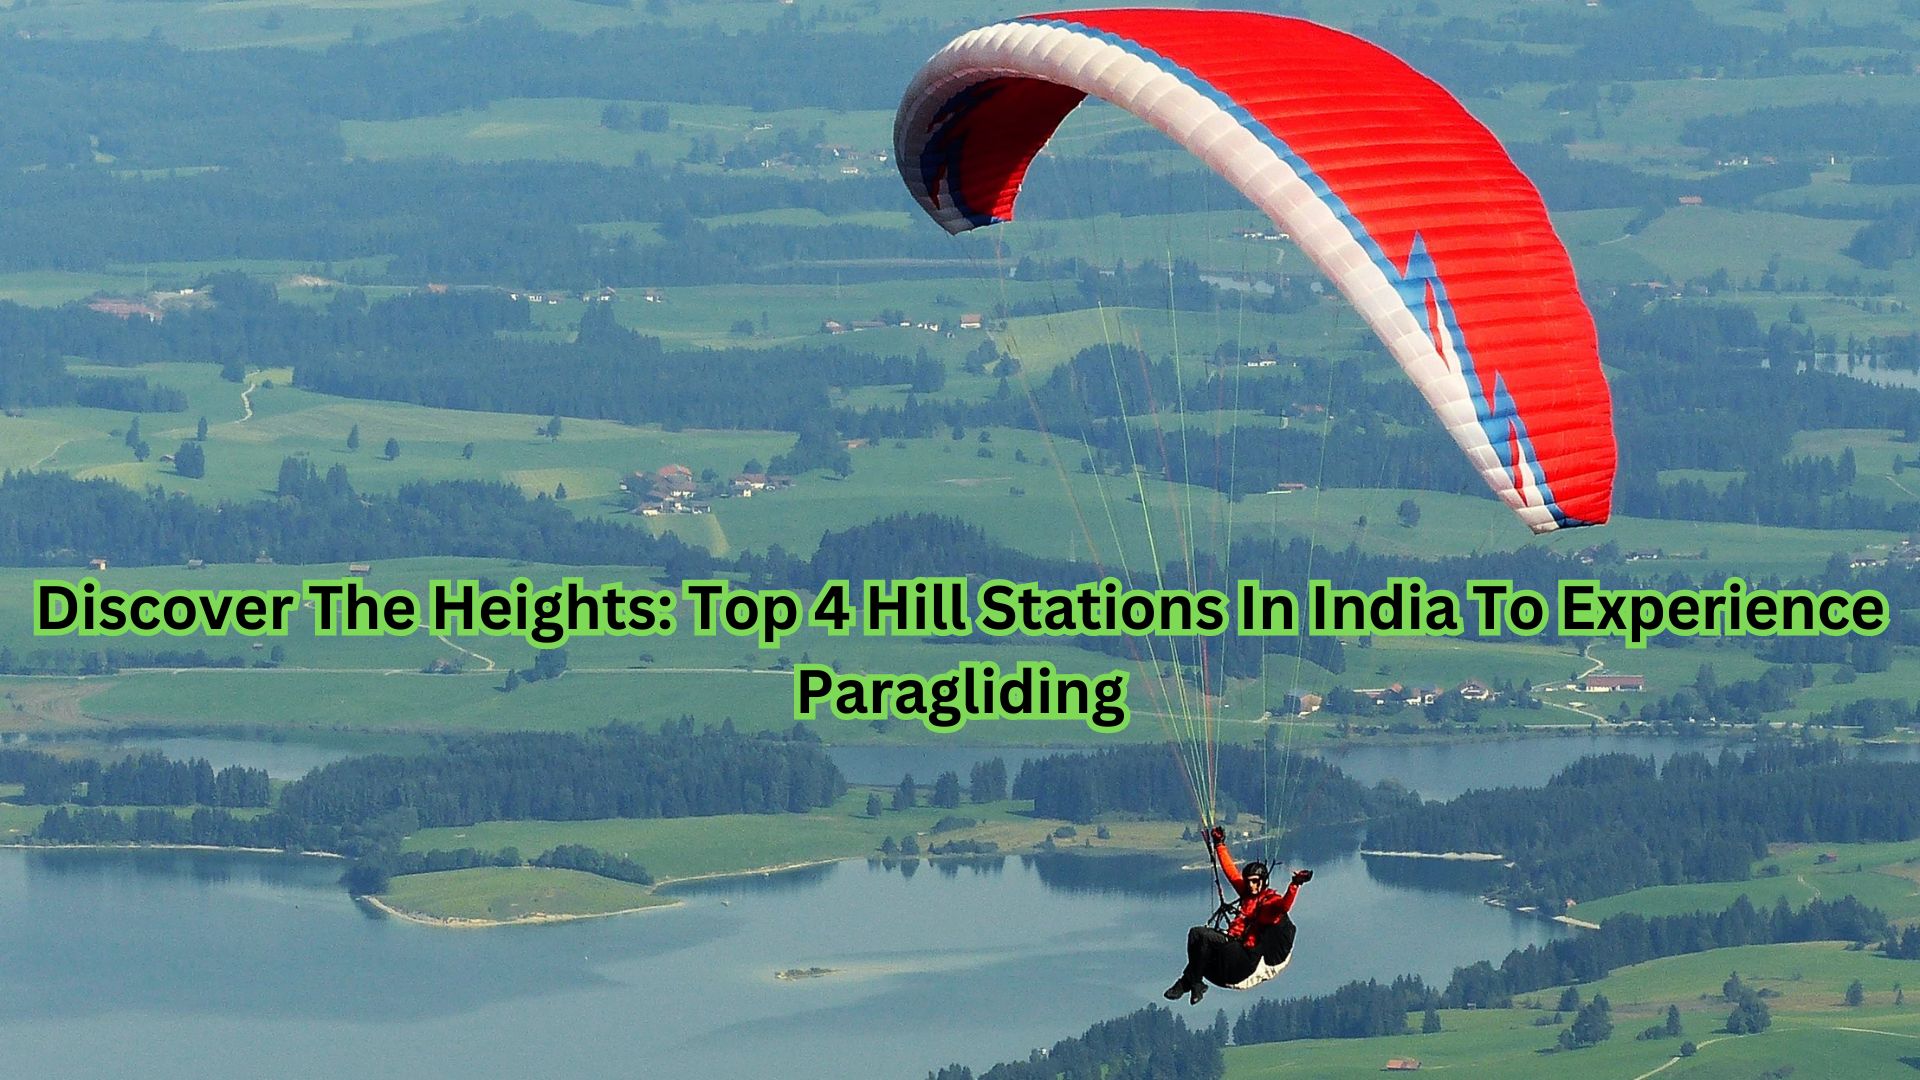 Discover The Heights: Top 4 Hill Stations In India To Experience Paragliding